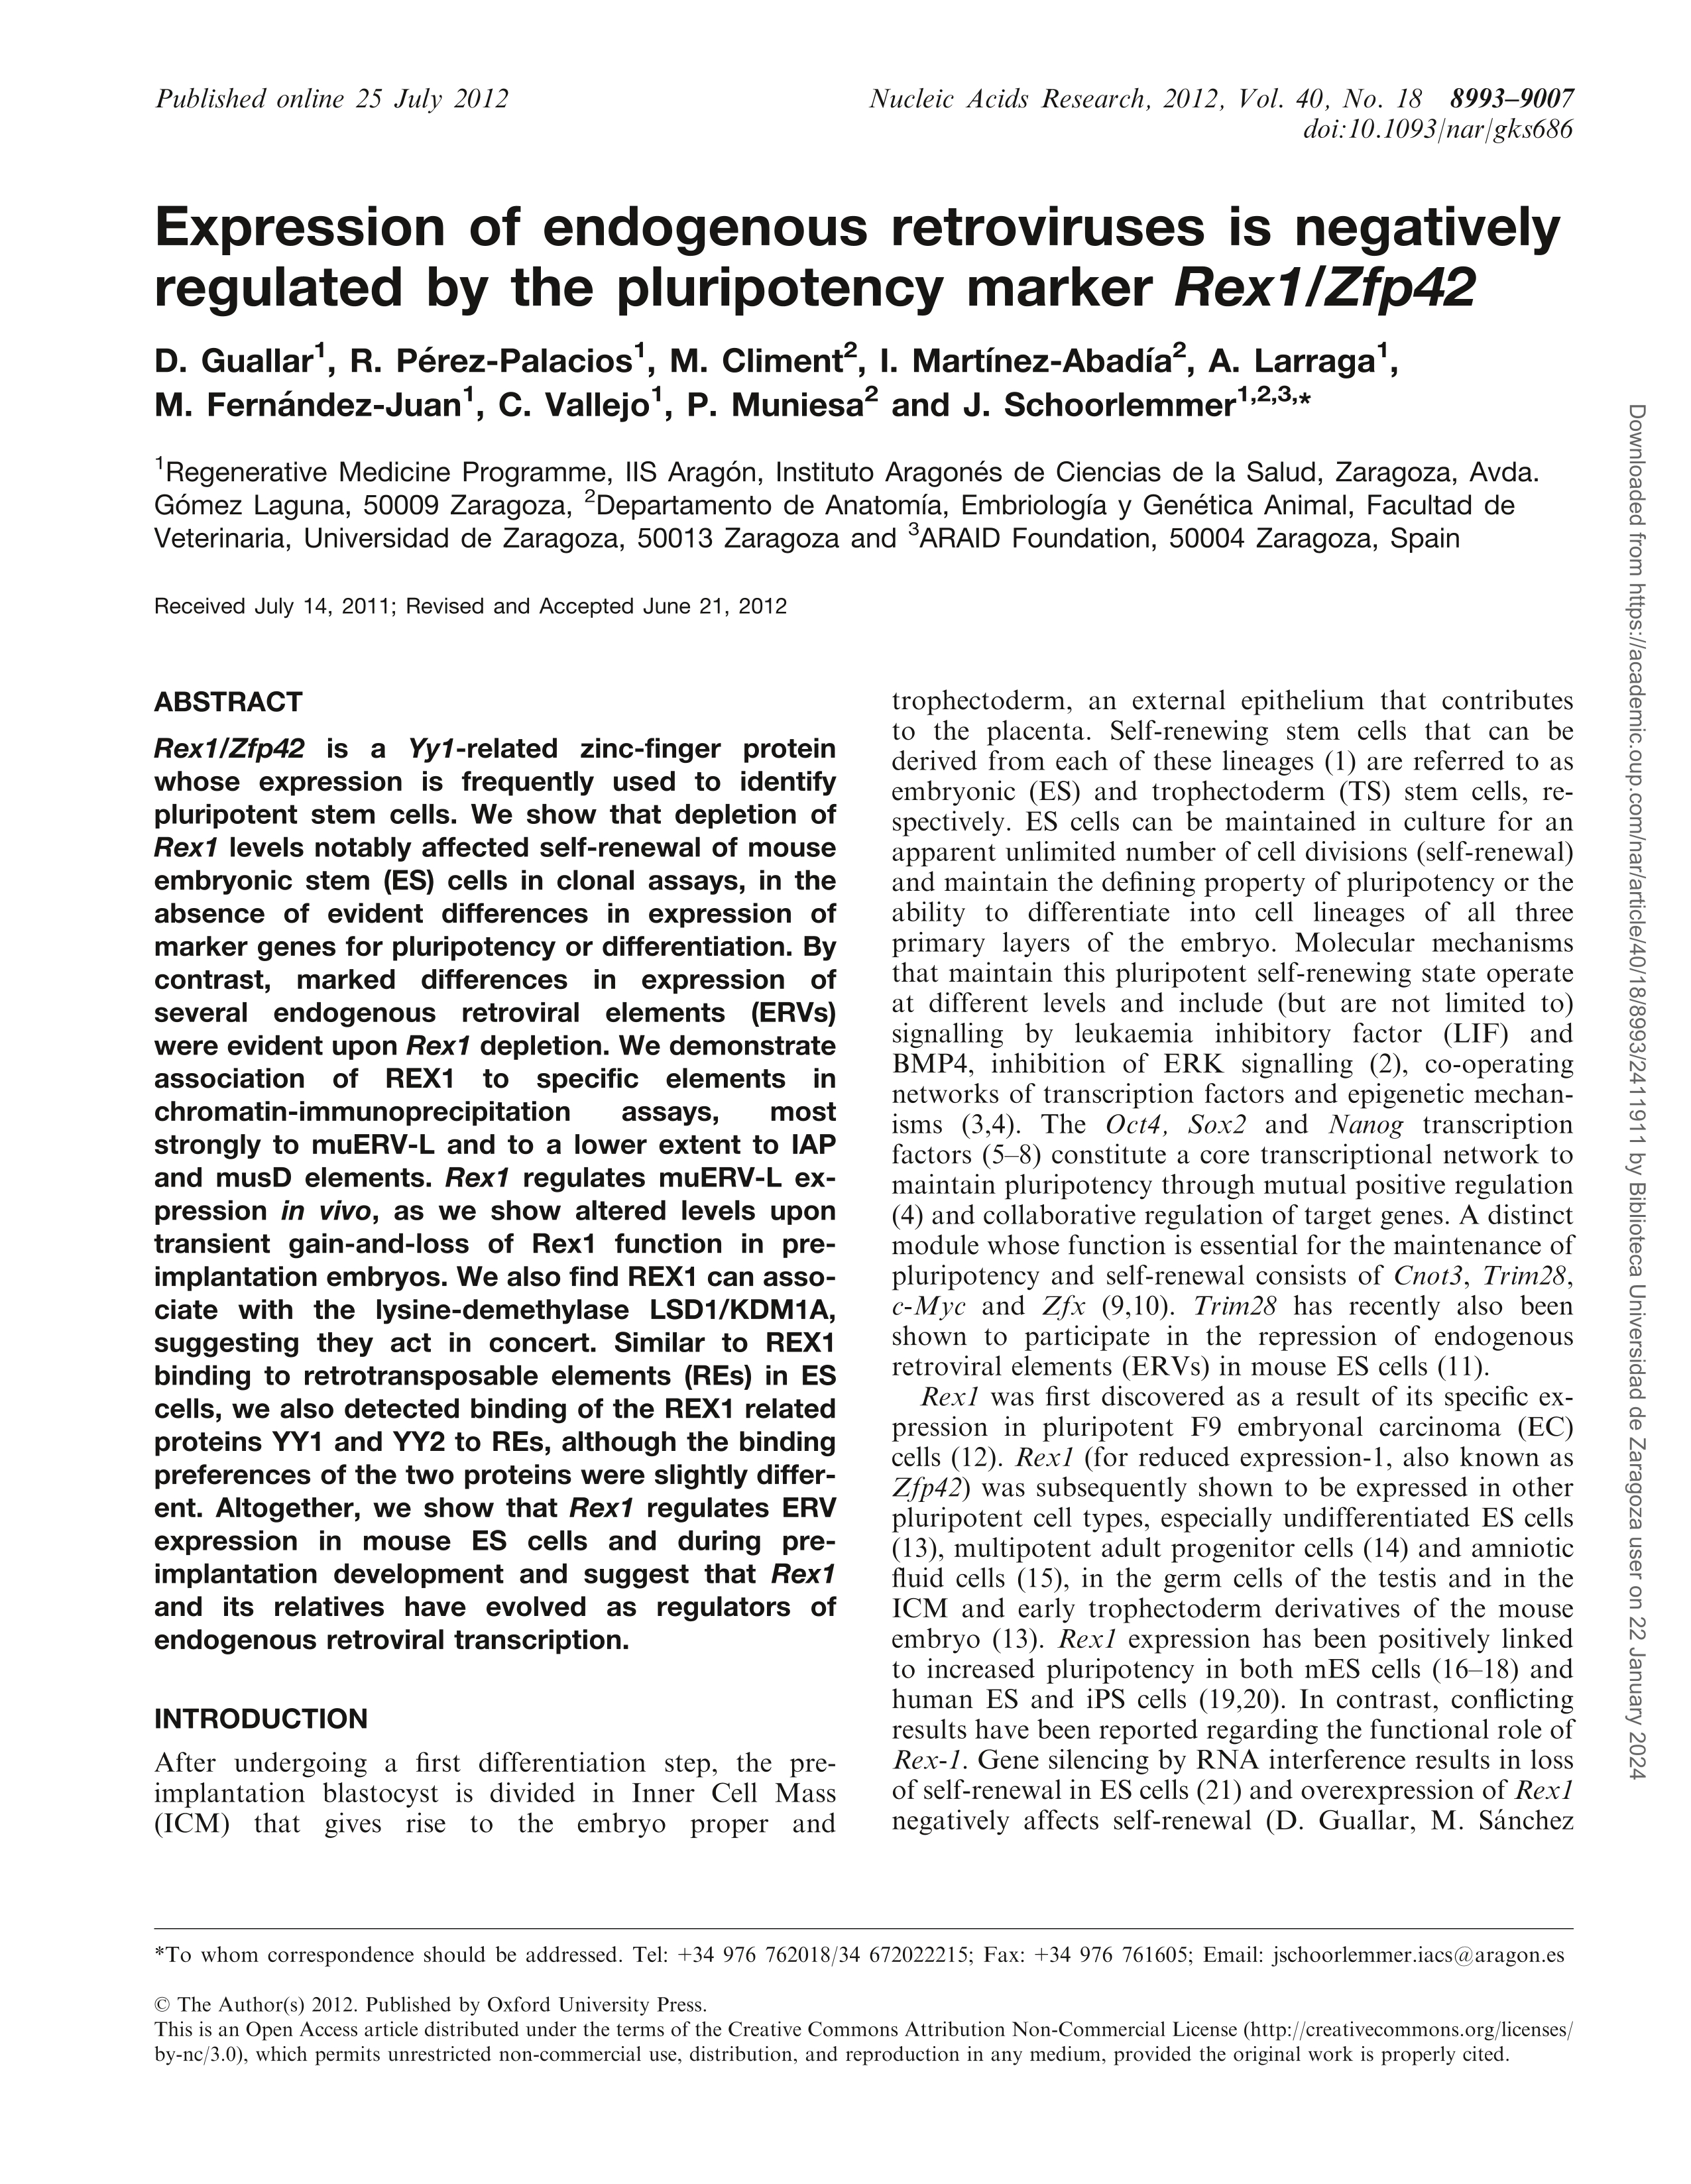 Expression of endogenous retroviruses is negatively regulated by the pluripotency marker Rex1/Zfp42